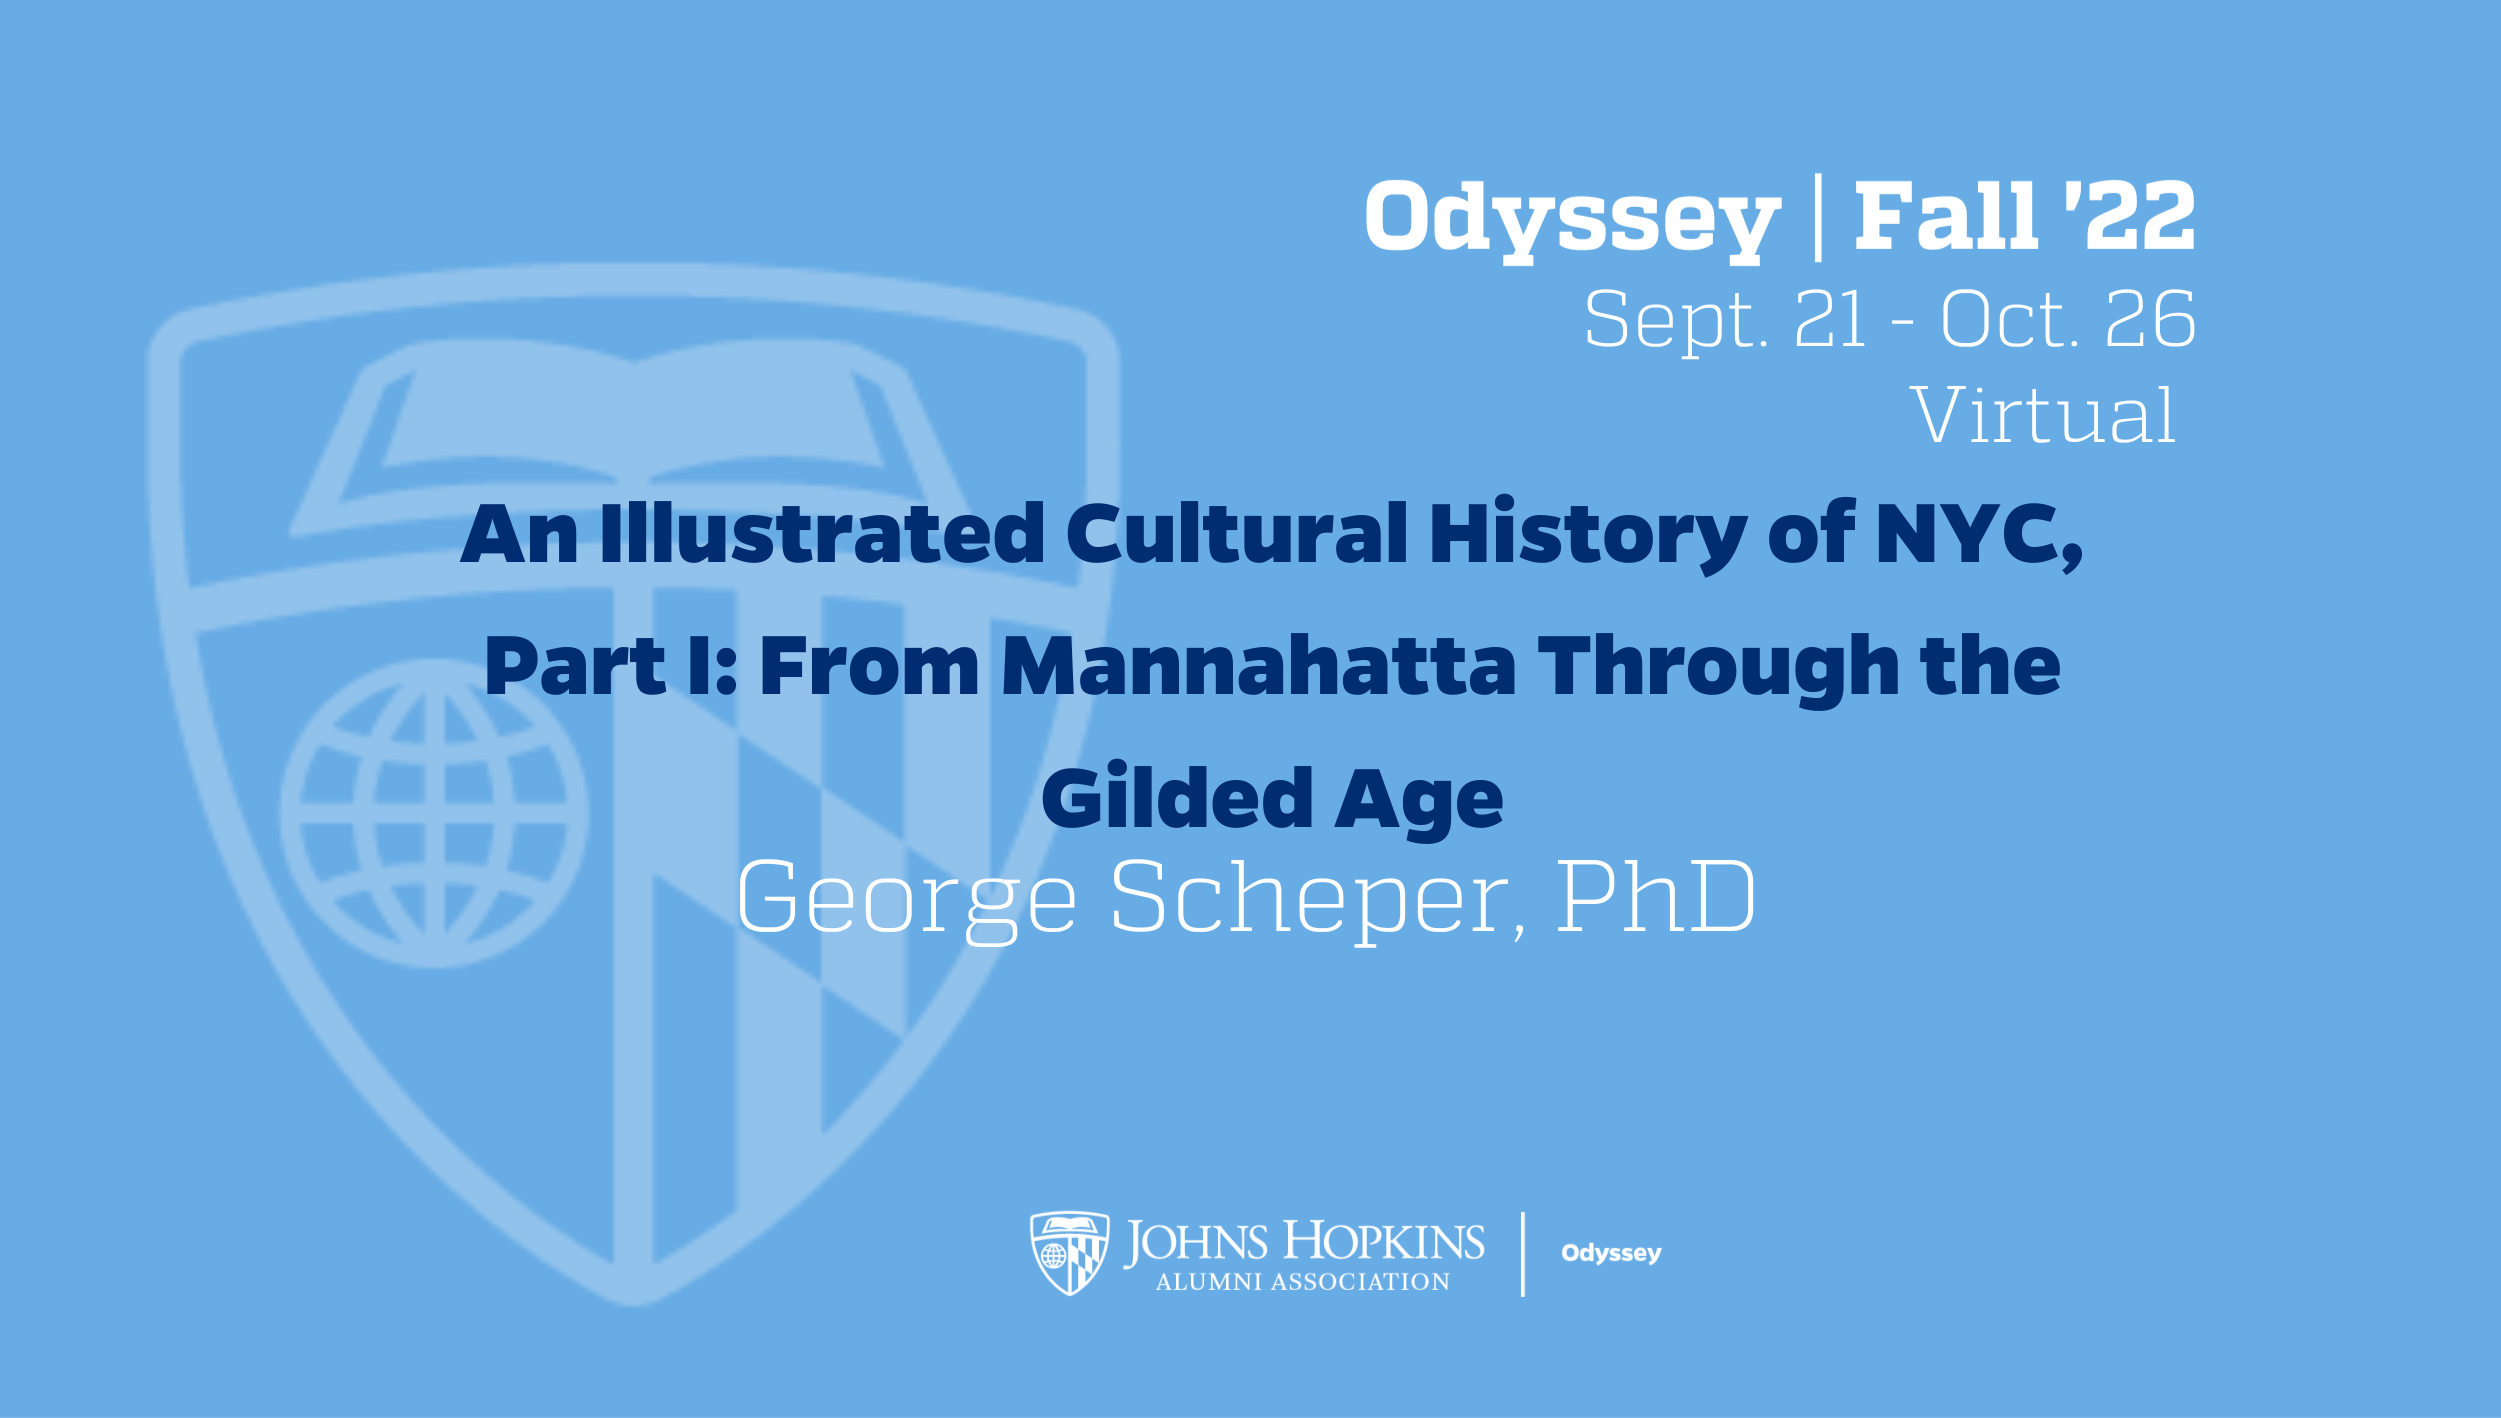 An Illustrated Cultural History of NYC, Part I: From Mannahatta Through the Gilded Age